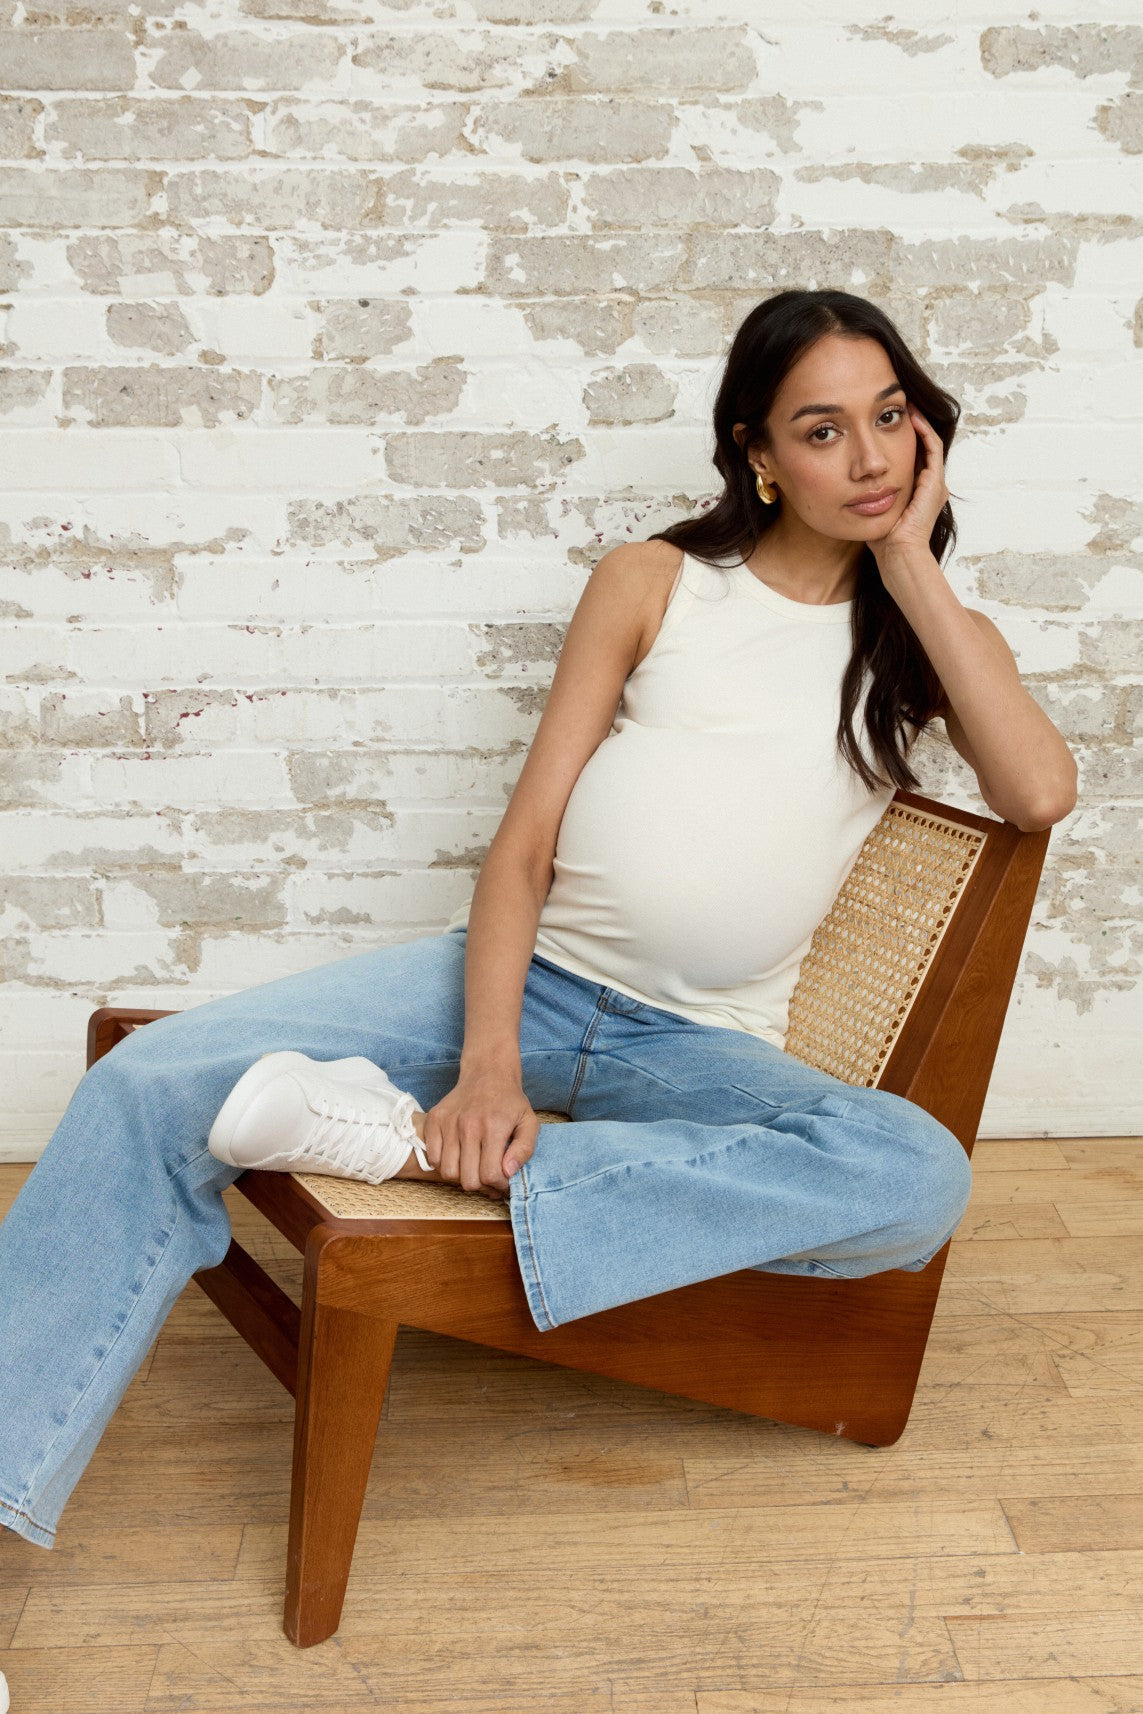 18 Best Stores: Where To Buy Maternity Clothes for Cheap - Baby